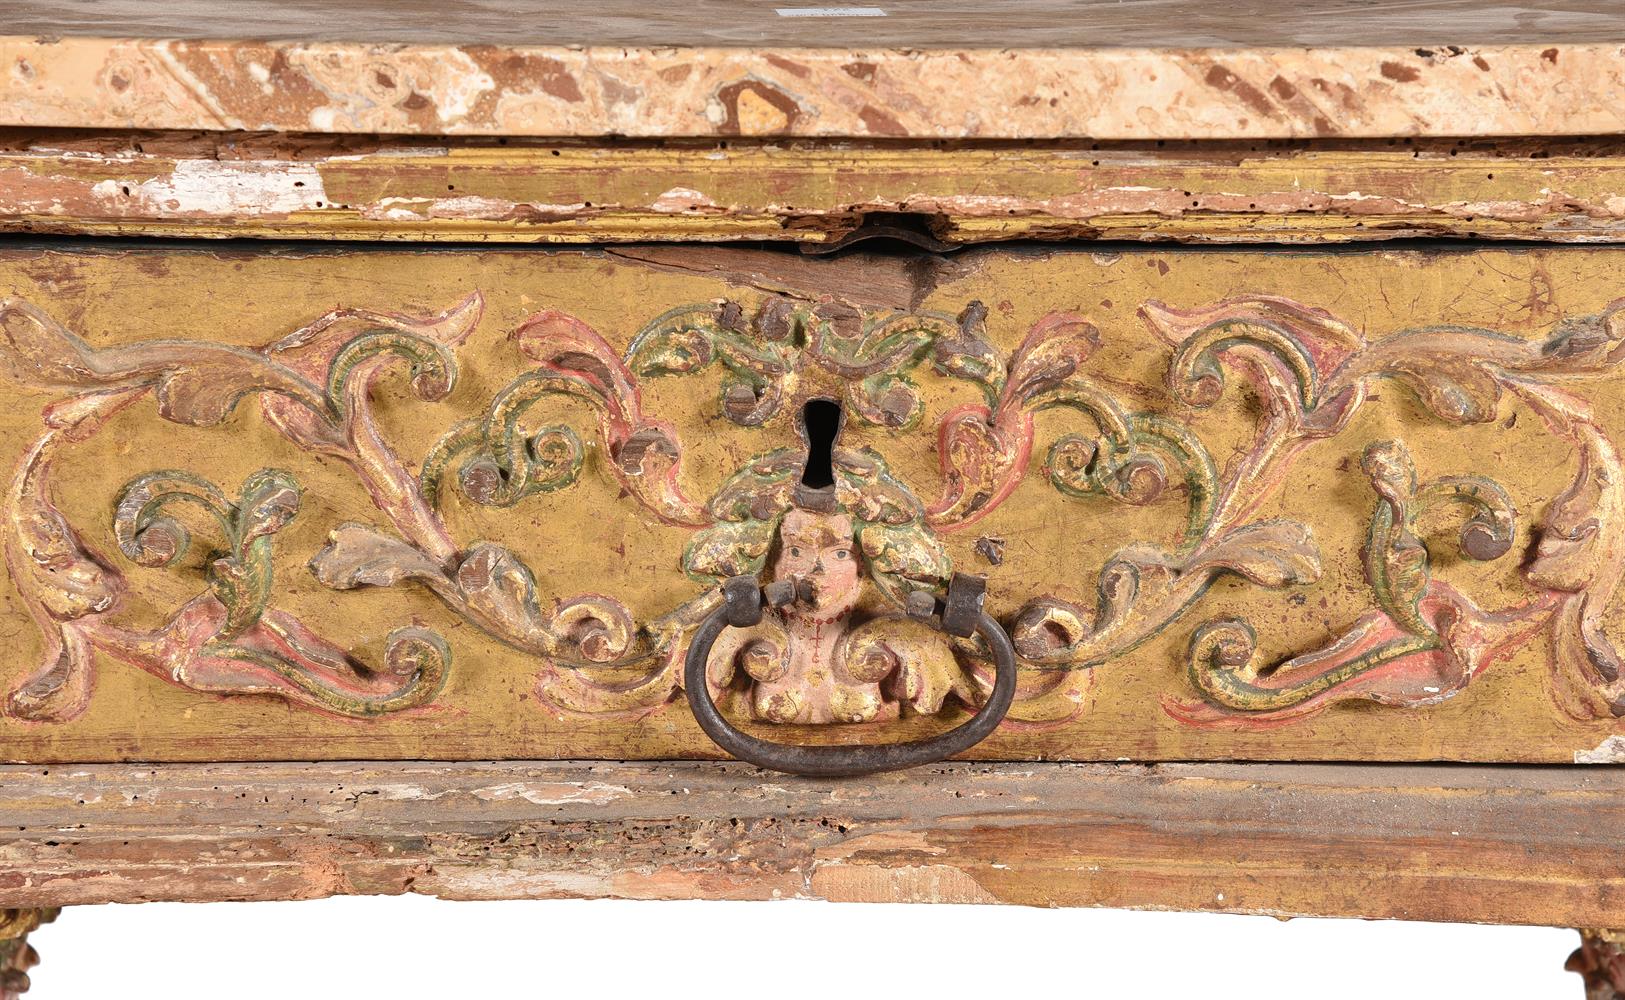 A SPANISH GILTWOOD AND POLYCHROME PAINTED SIDE OR ALTAR TABLE, LATE 17TH/EARLY 18TH CENTURY - Image 6 of 7